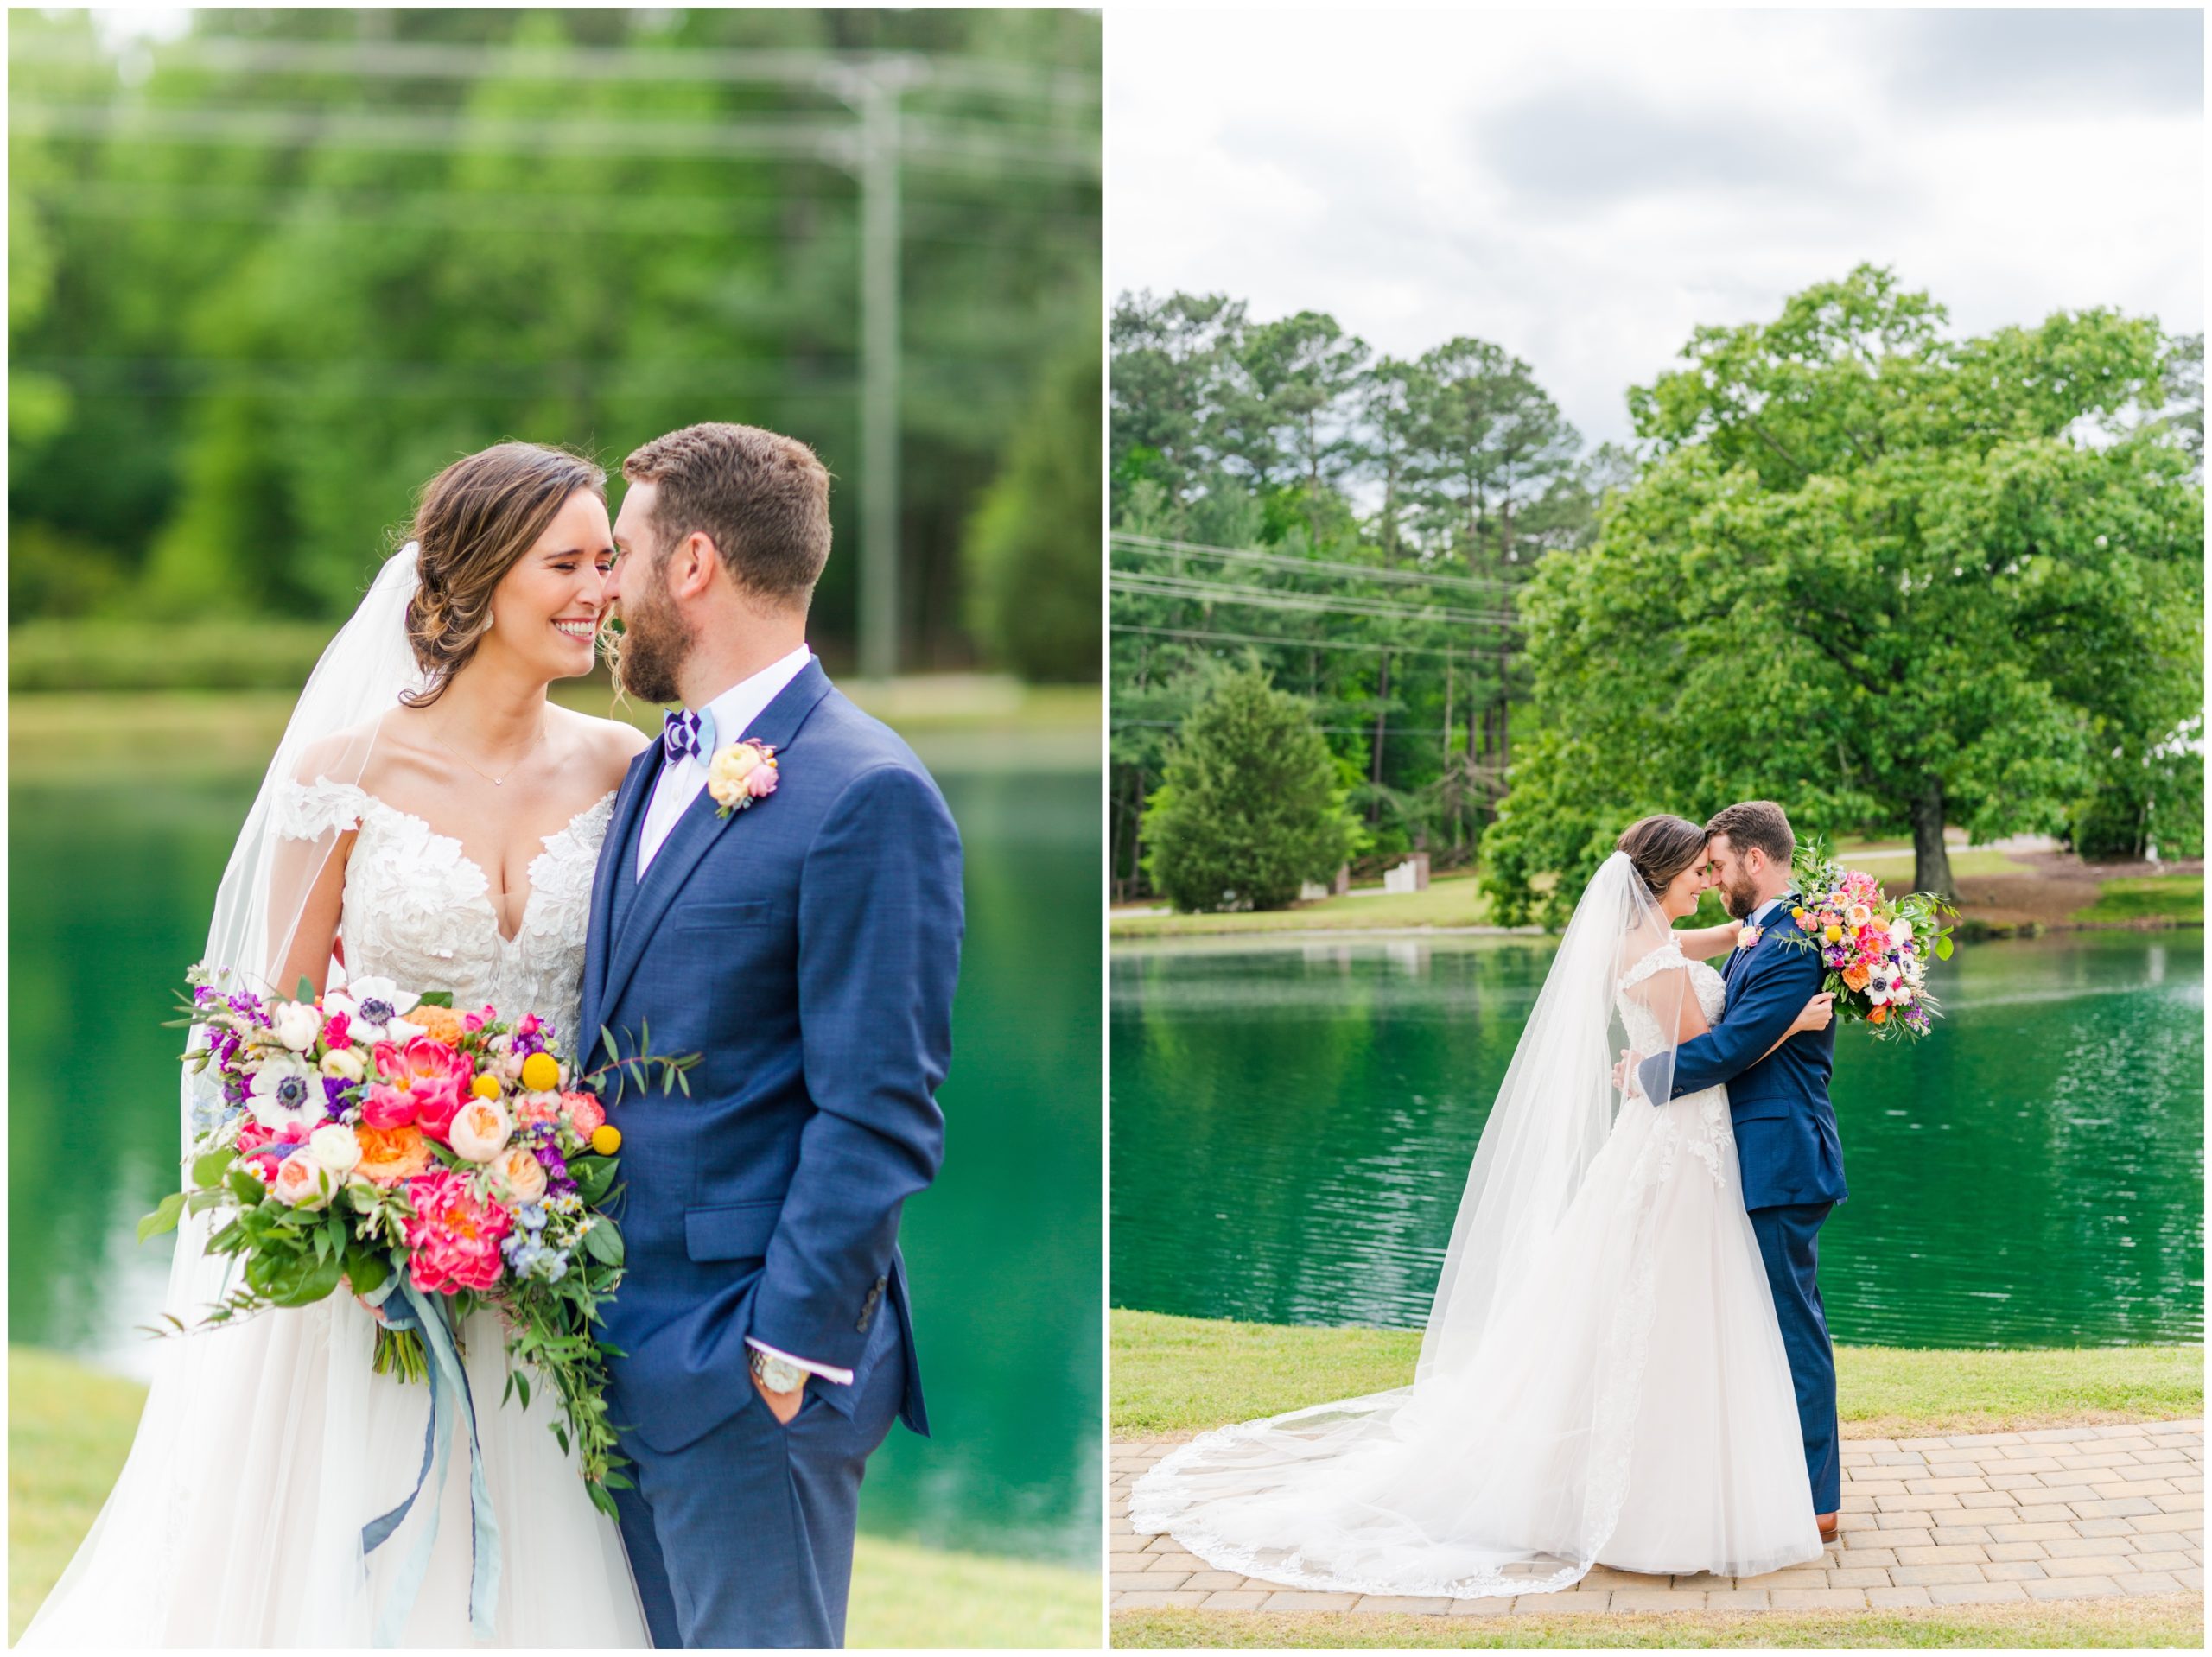 A wedding photographer's favorite parts of the wedding day